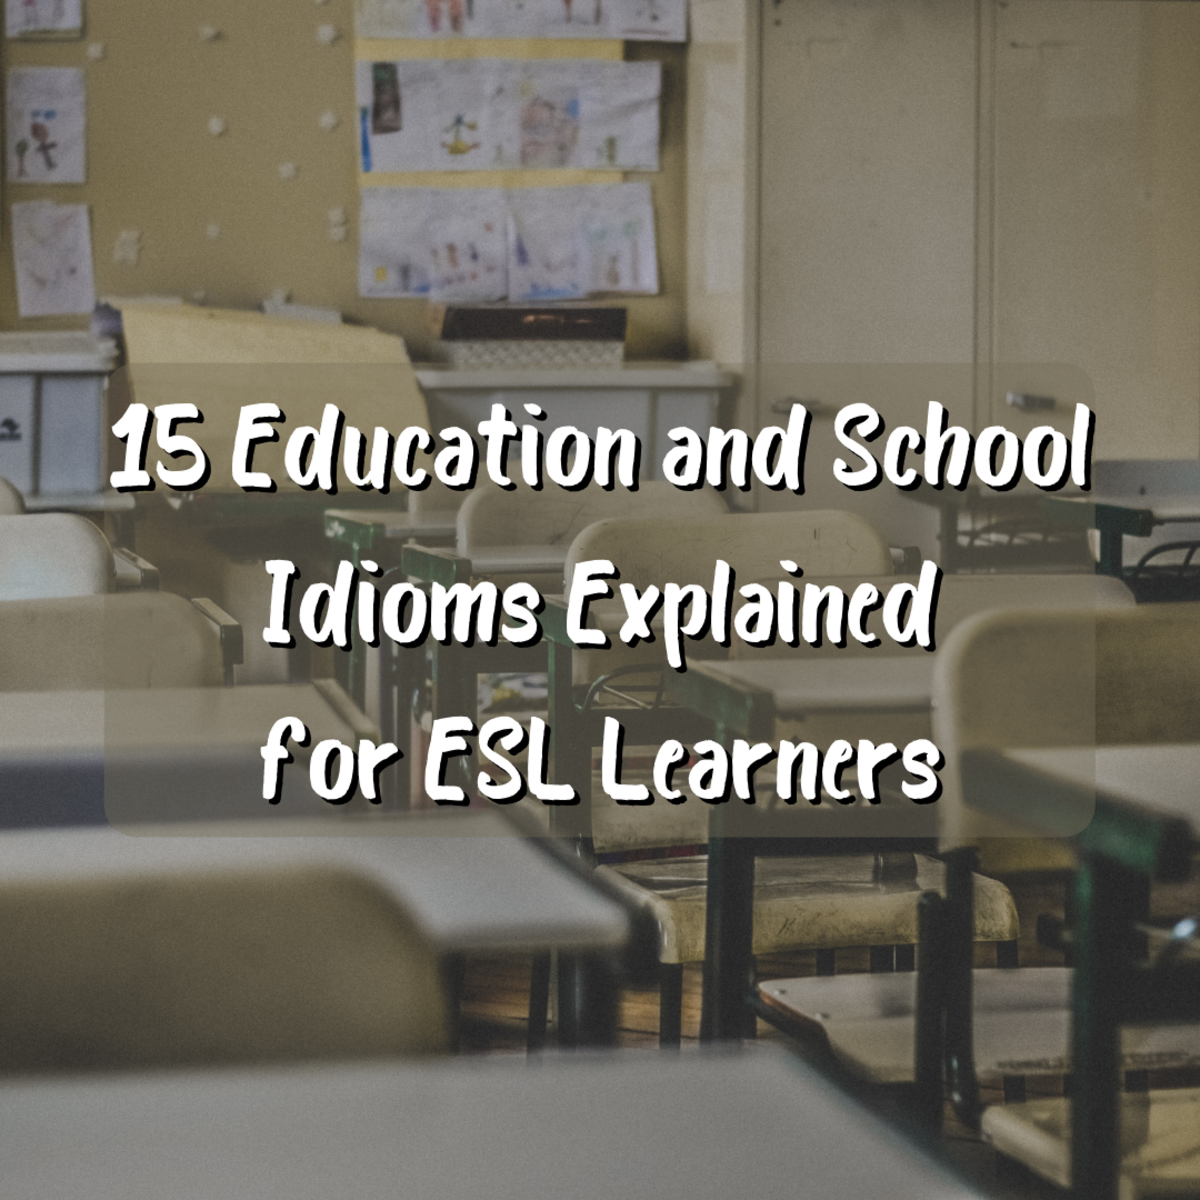 Read on to learn about 15 commonly used English education- and school-related idioms. Understanding these idioms will help ESL students get a better grasp on conversational English.